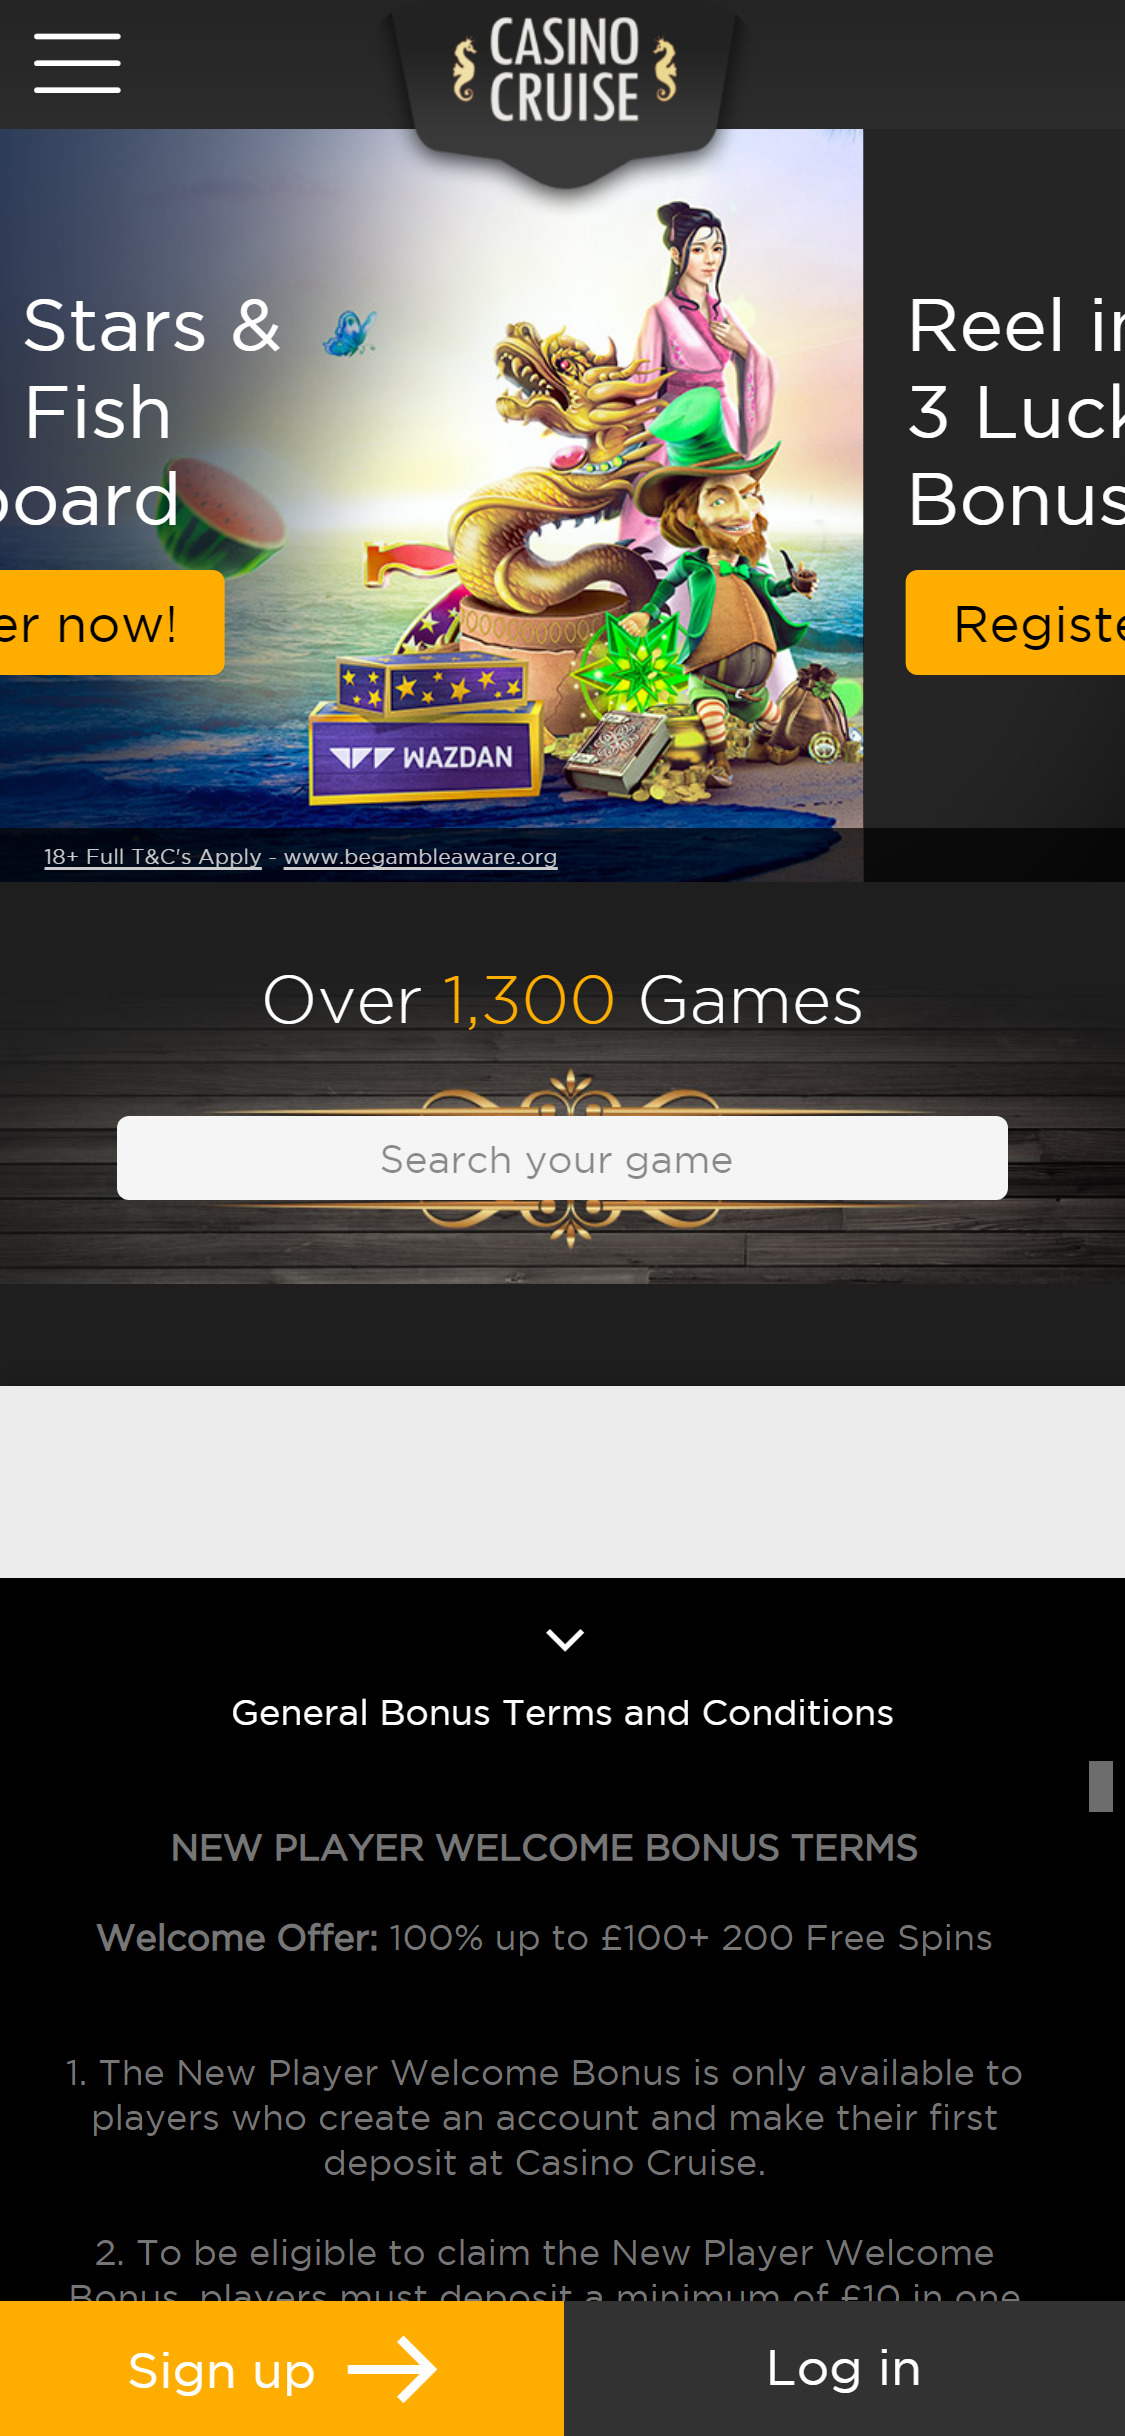 Casino Cruise Mobile Review